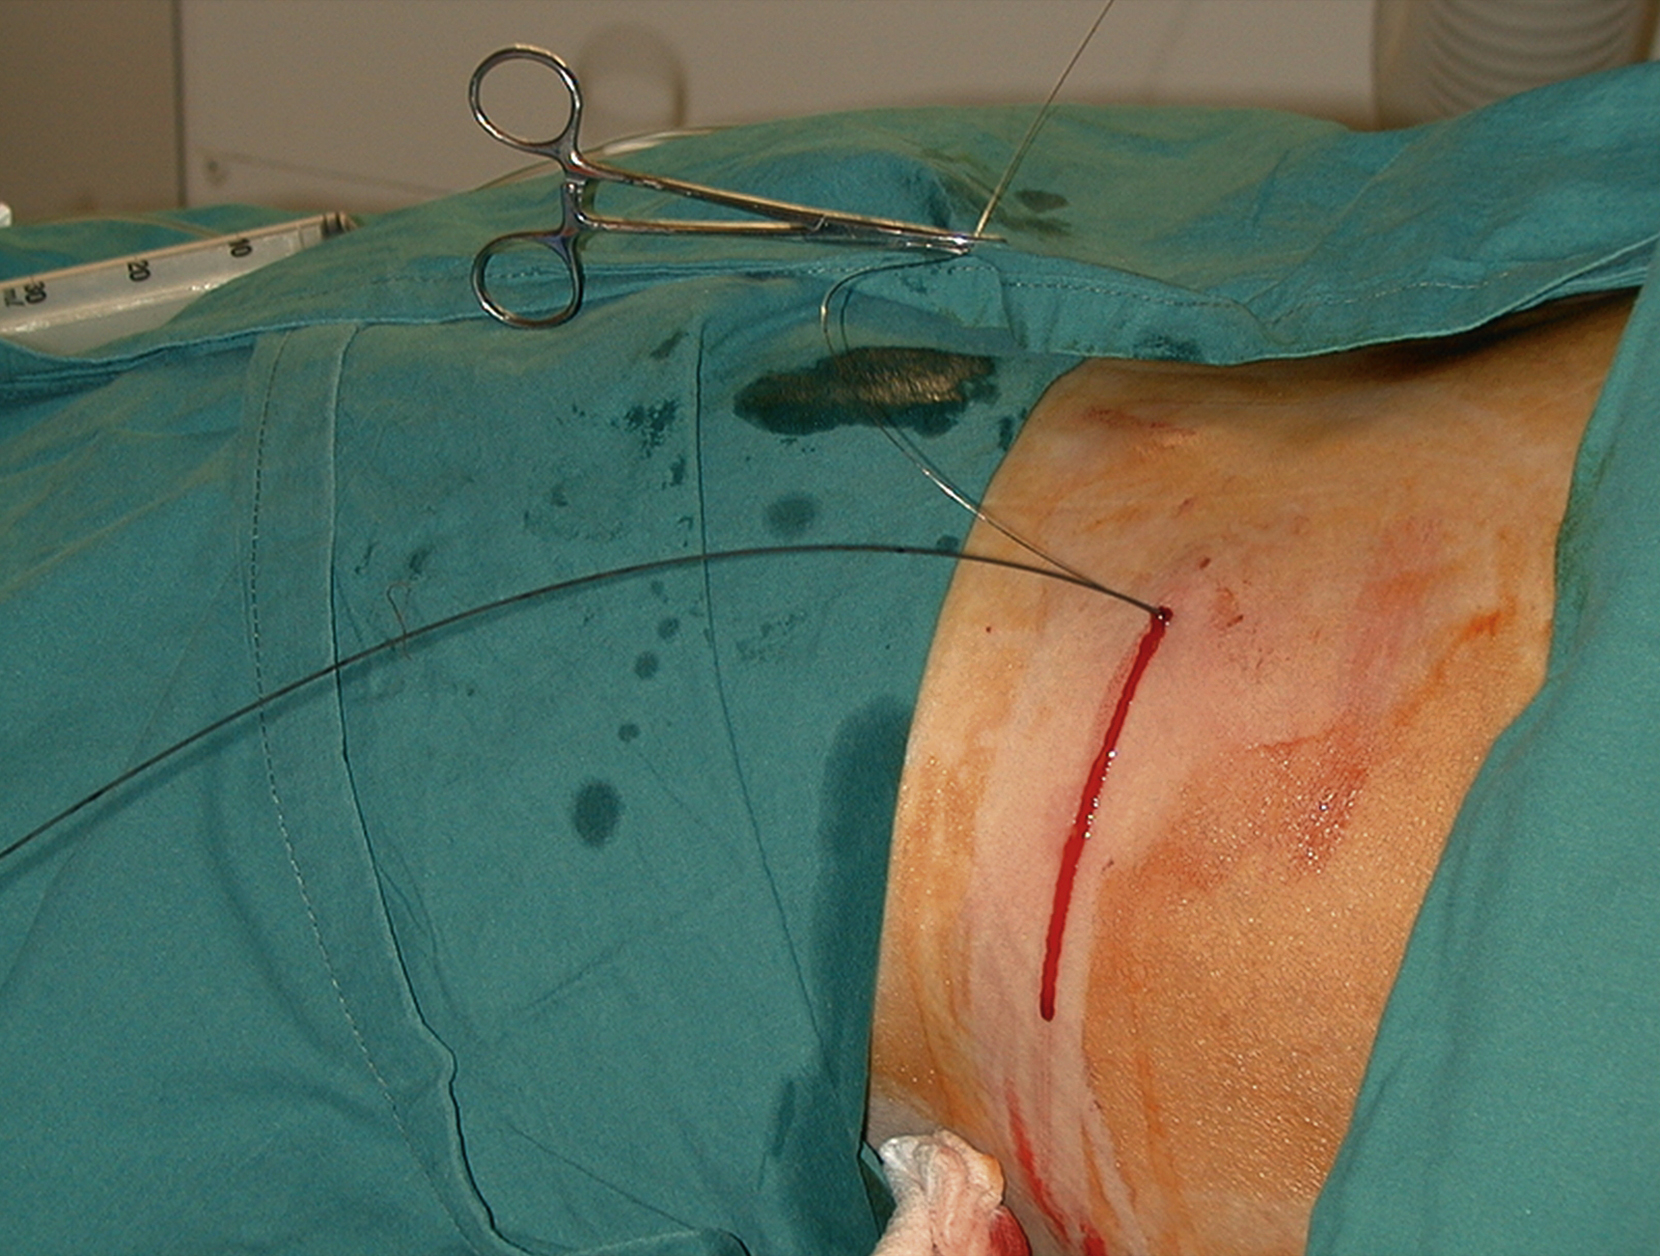 Fig. 100.6, The outer sheath has been removed over the 0.018-inch and 0.035-inch wires, with the 0.018-inch wire clipped to one side as a safety wire that can be removed once the percutaneous nephrostomy has been inserted.